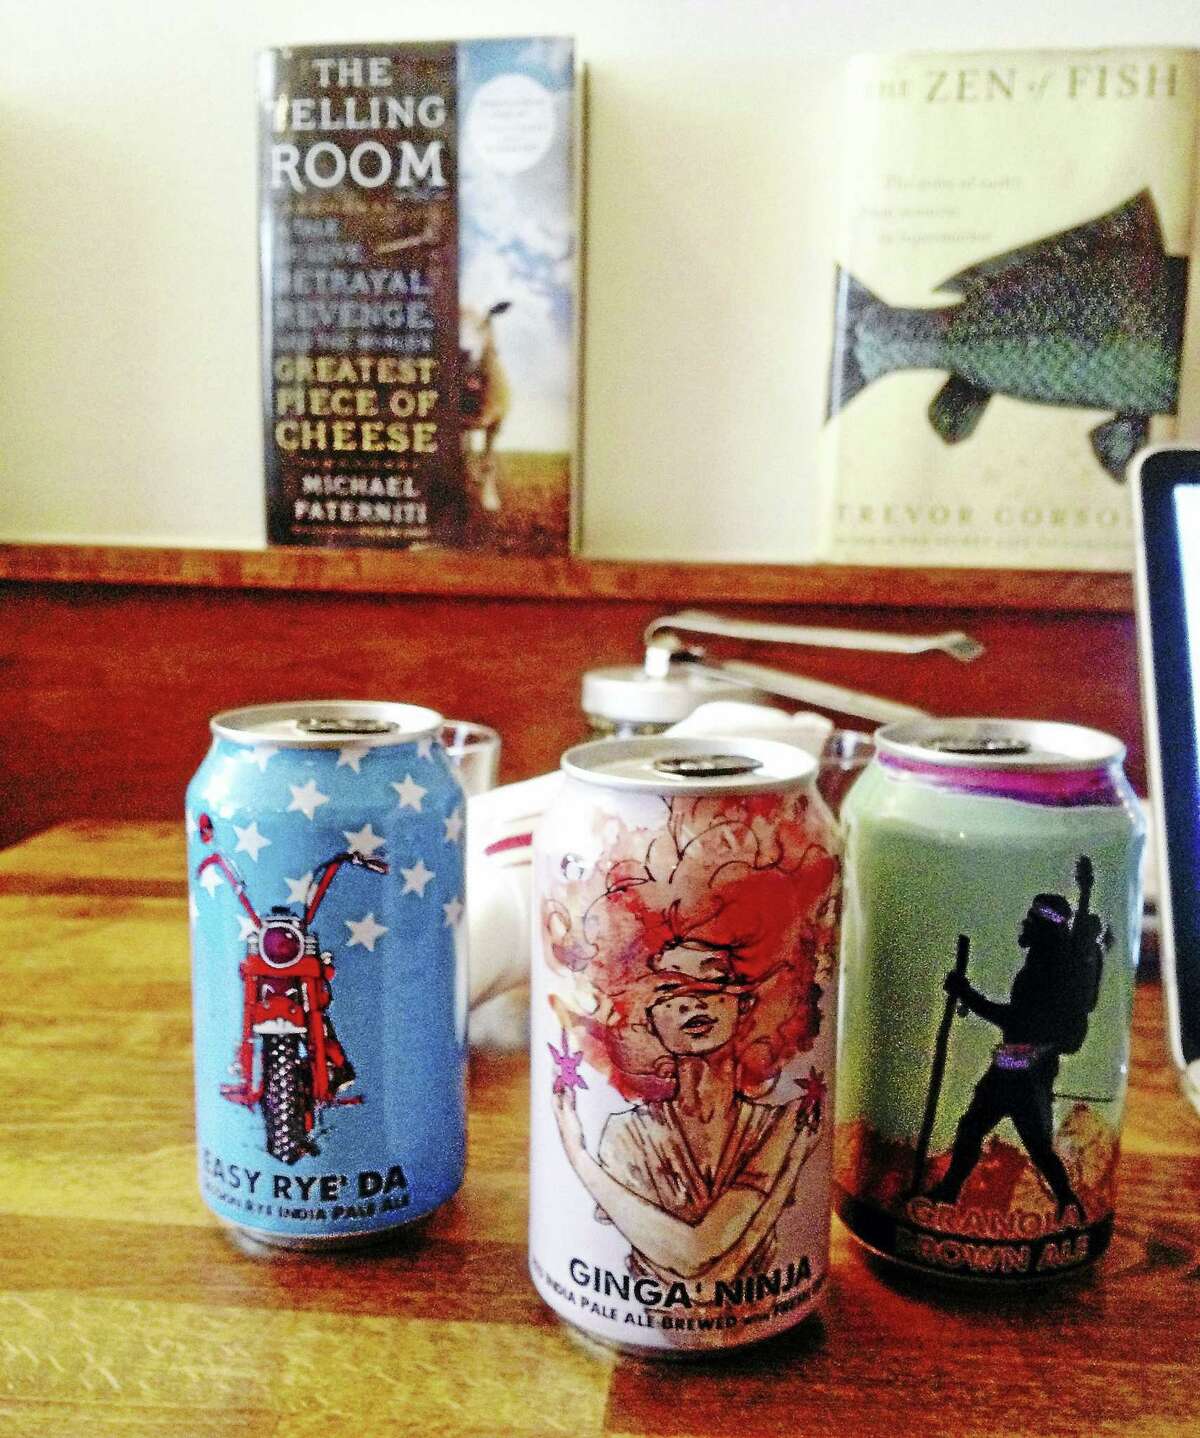 Three of the beer cans designed by Max Toth from left are Easy Rye’ Da, Ginga’ Ninja and Granola Brown Ale.